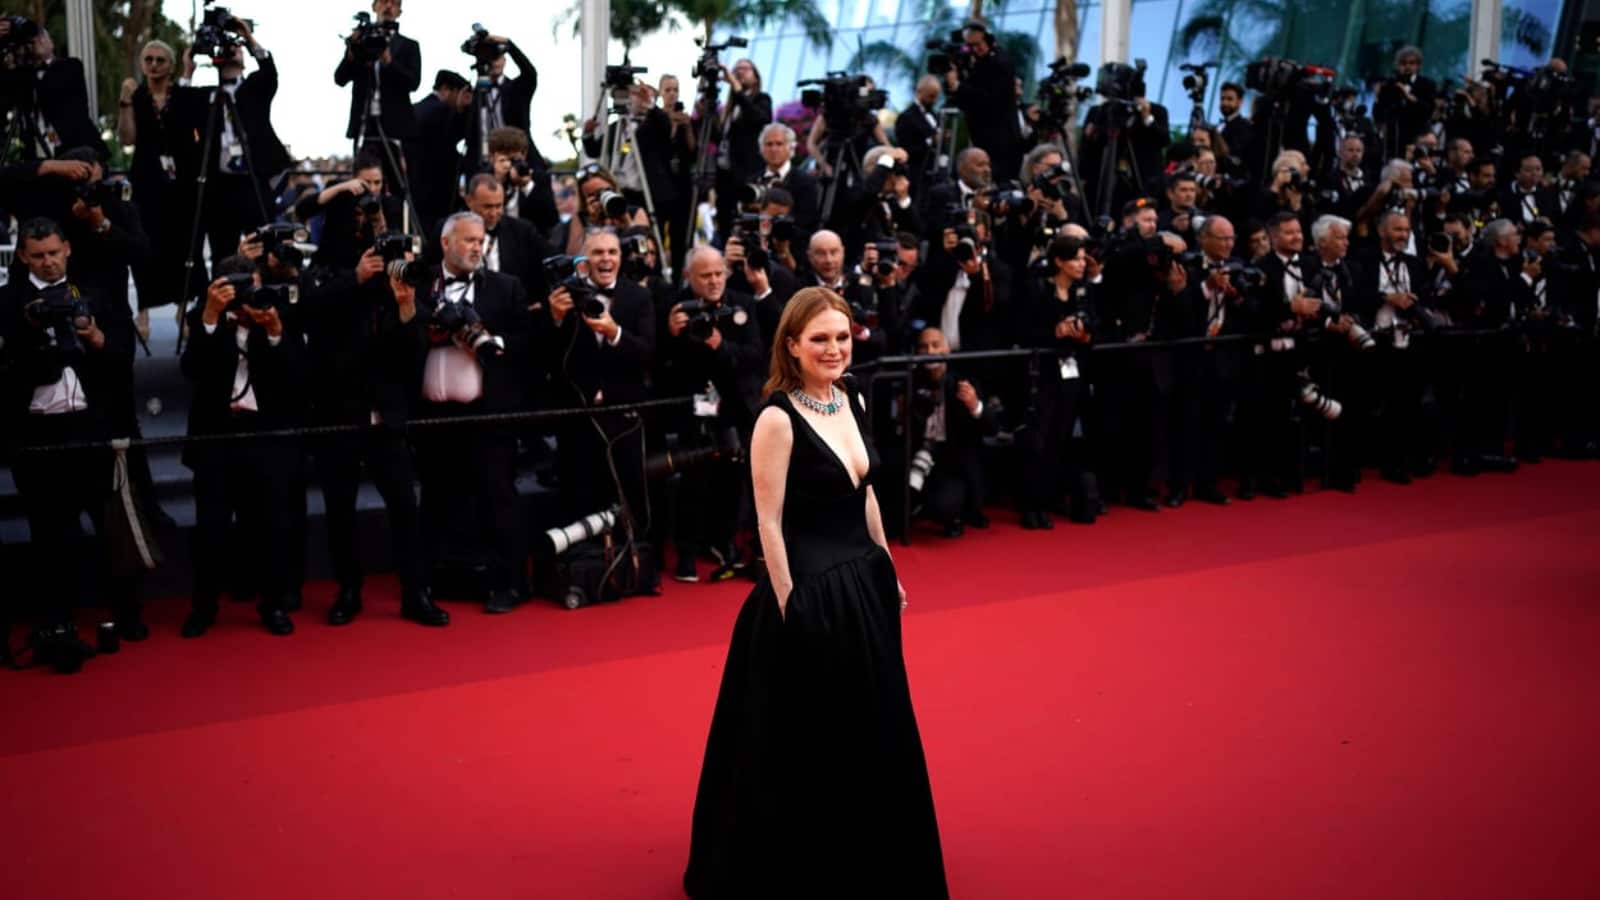 Julianna Moore stunned the red carpet at Cannes Film Festival 2022